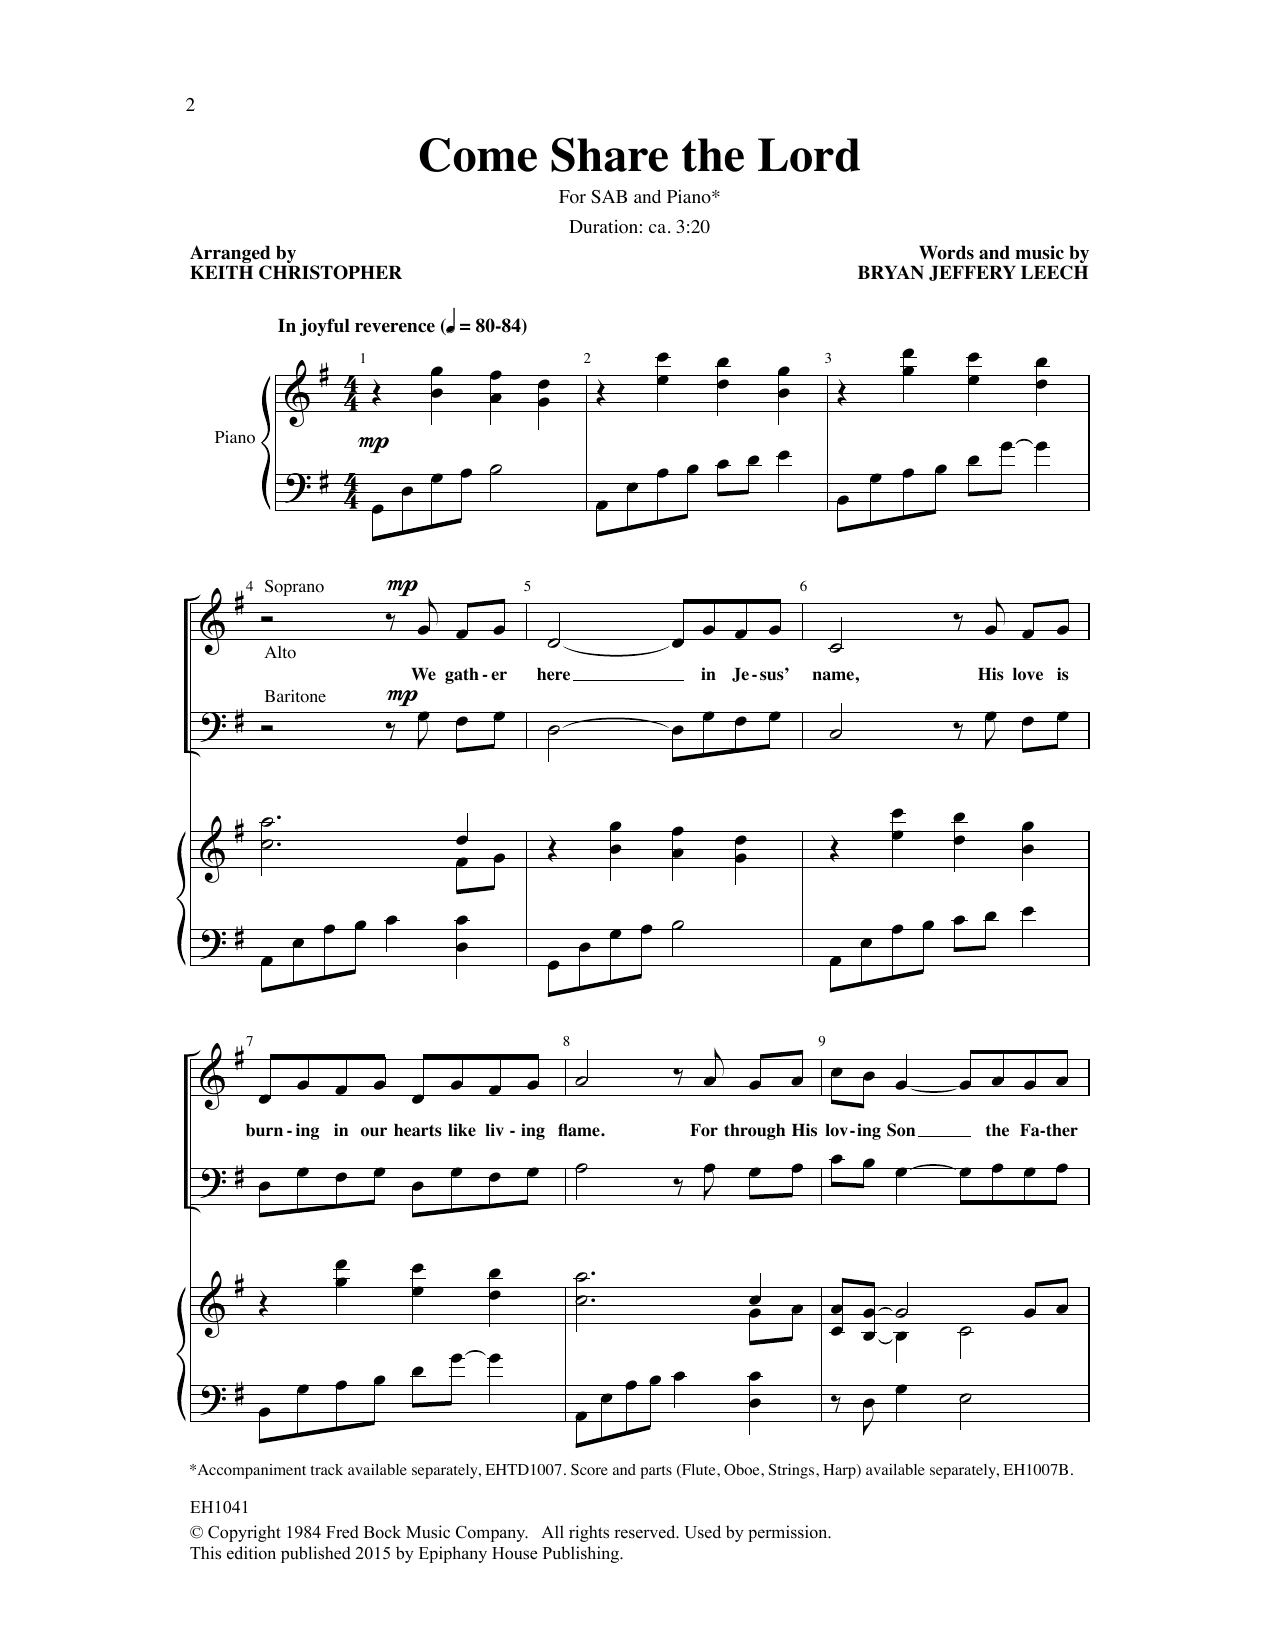 Download Keith Christopher Come Share the Lord Sheet Music